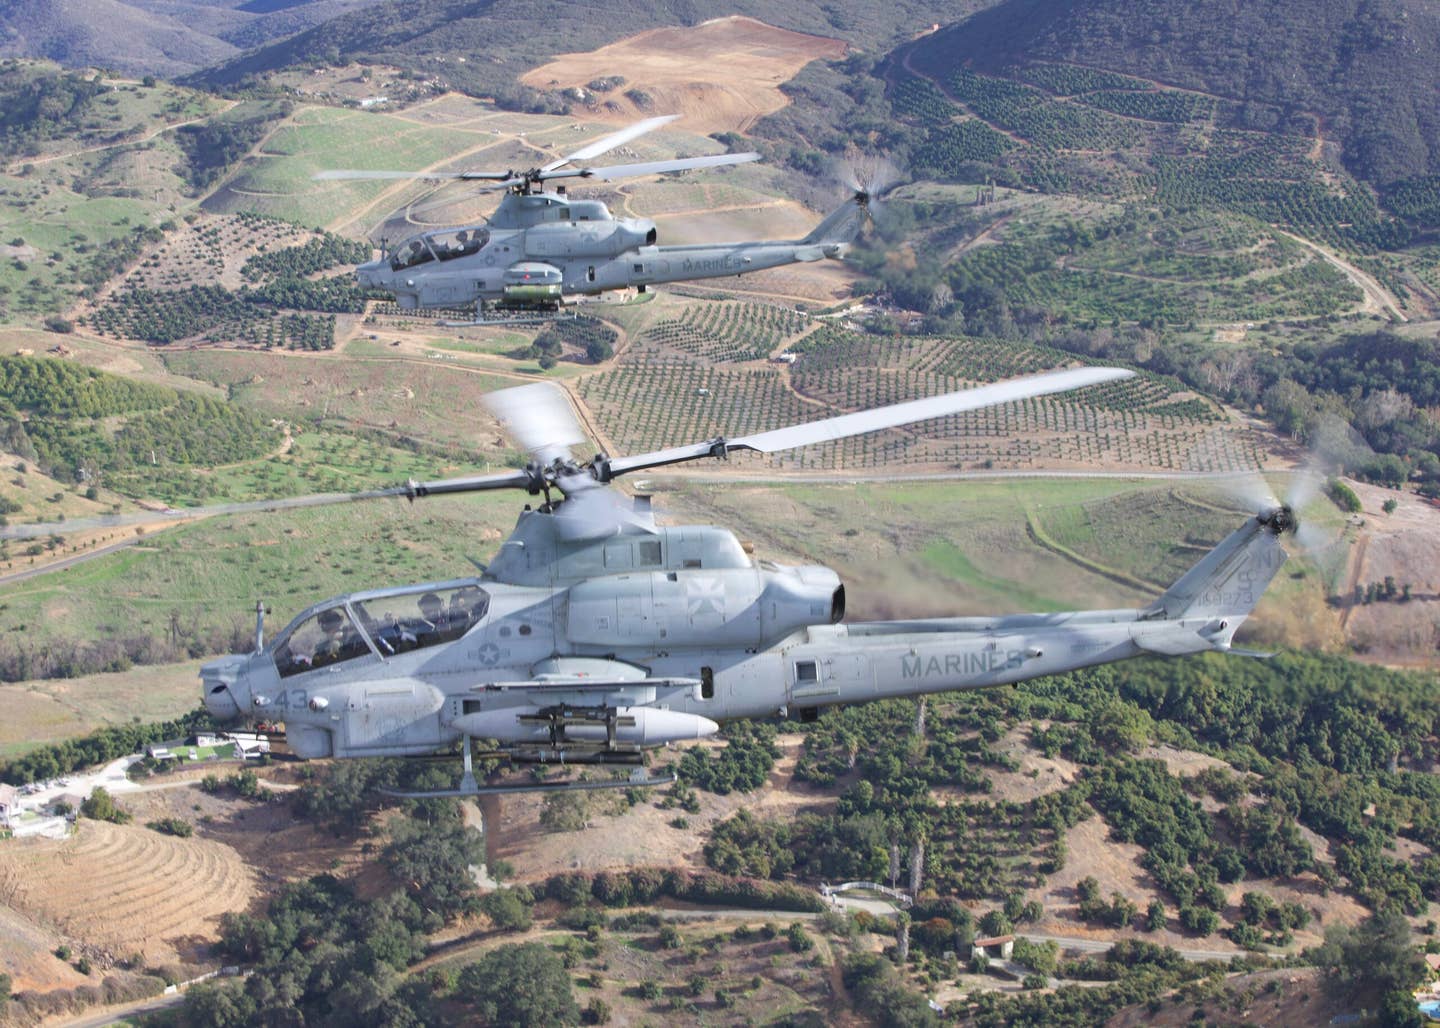 A section of AH-1Zs on a training mission. (Author)